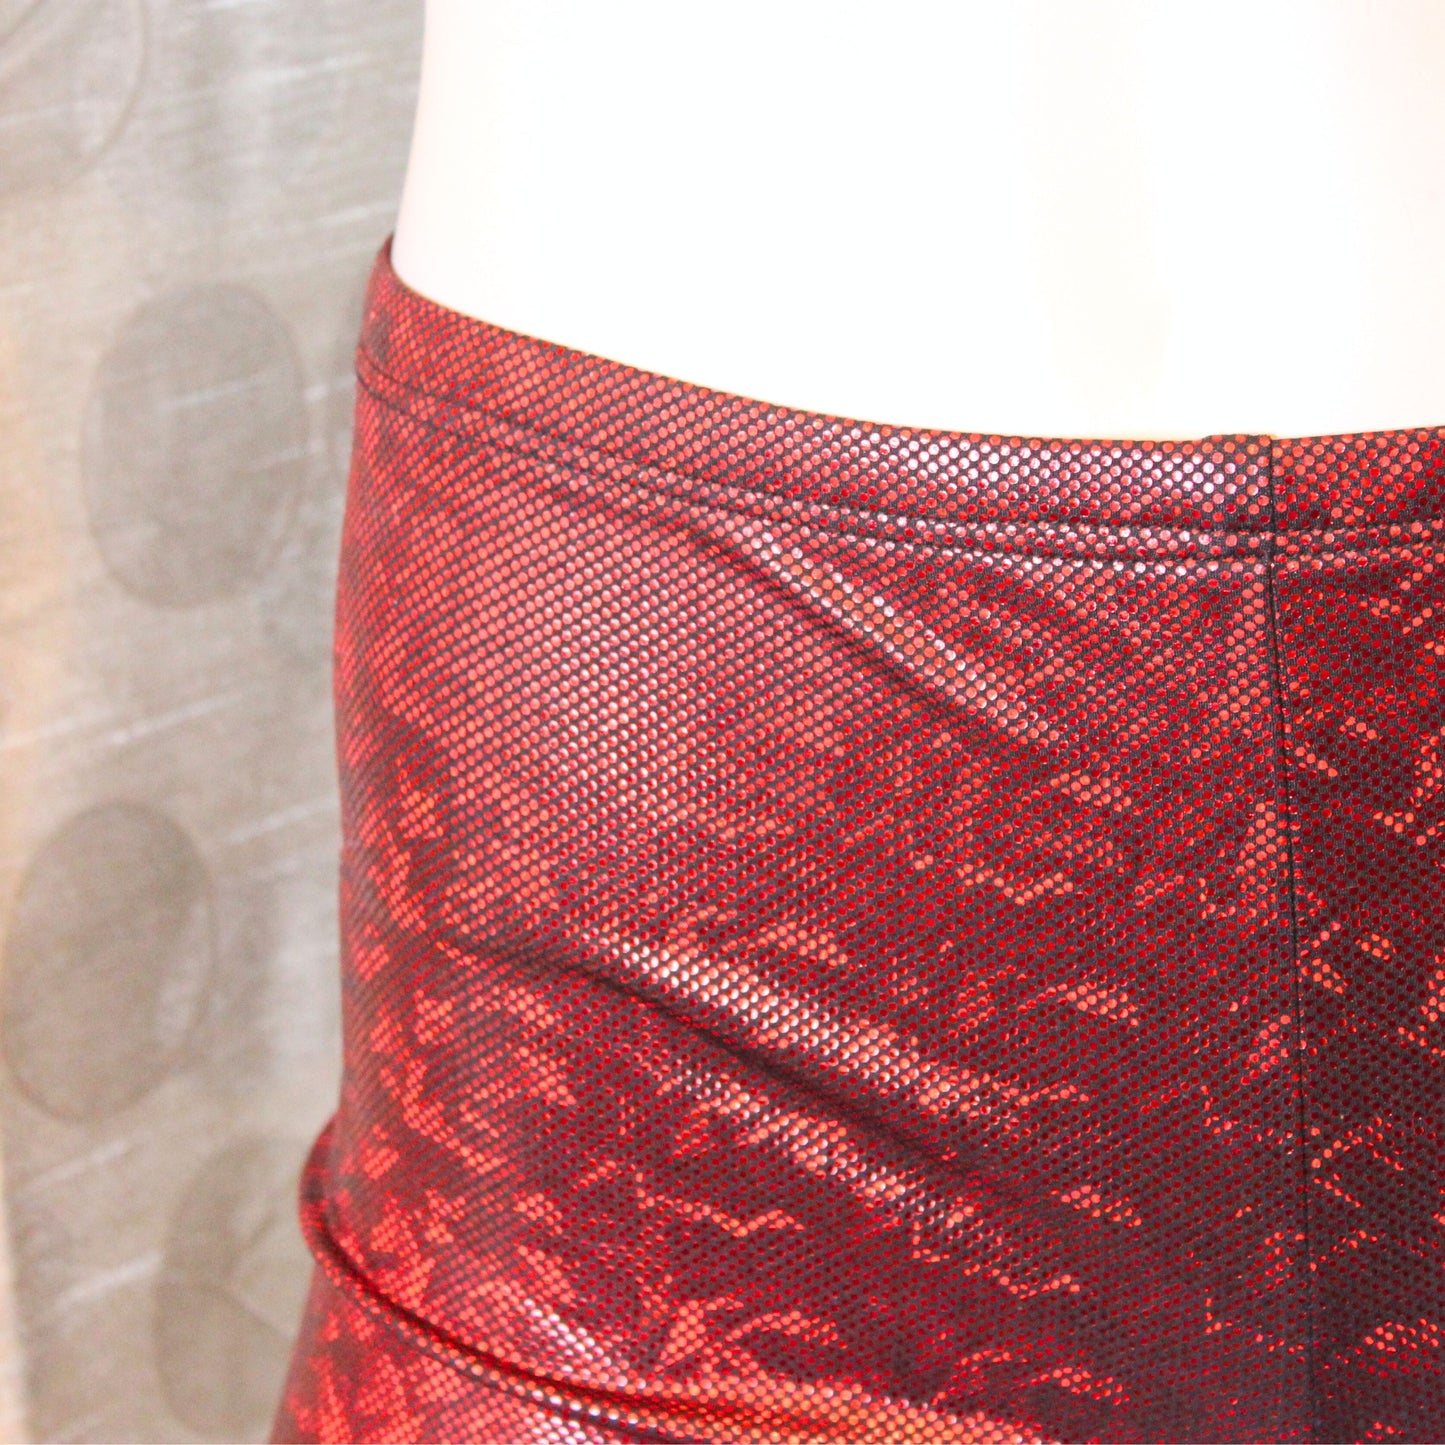 The VM Sparkly Tap Shorts